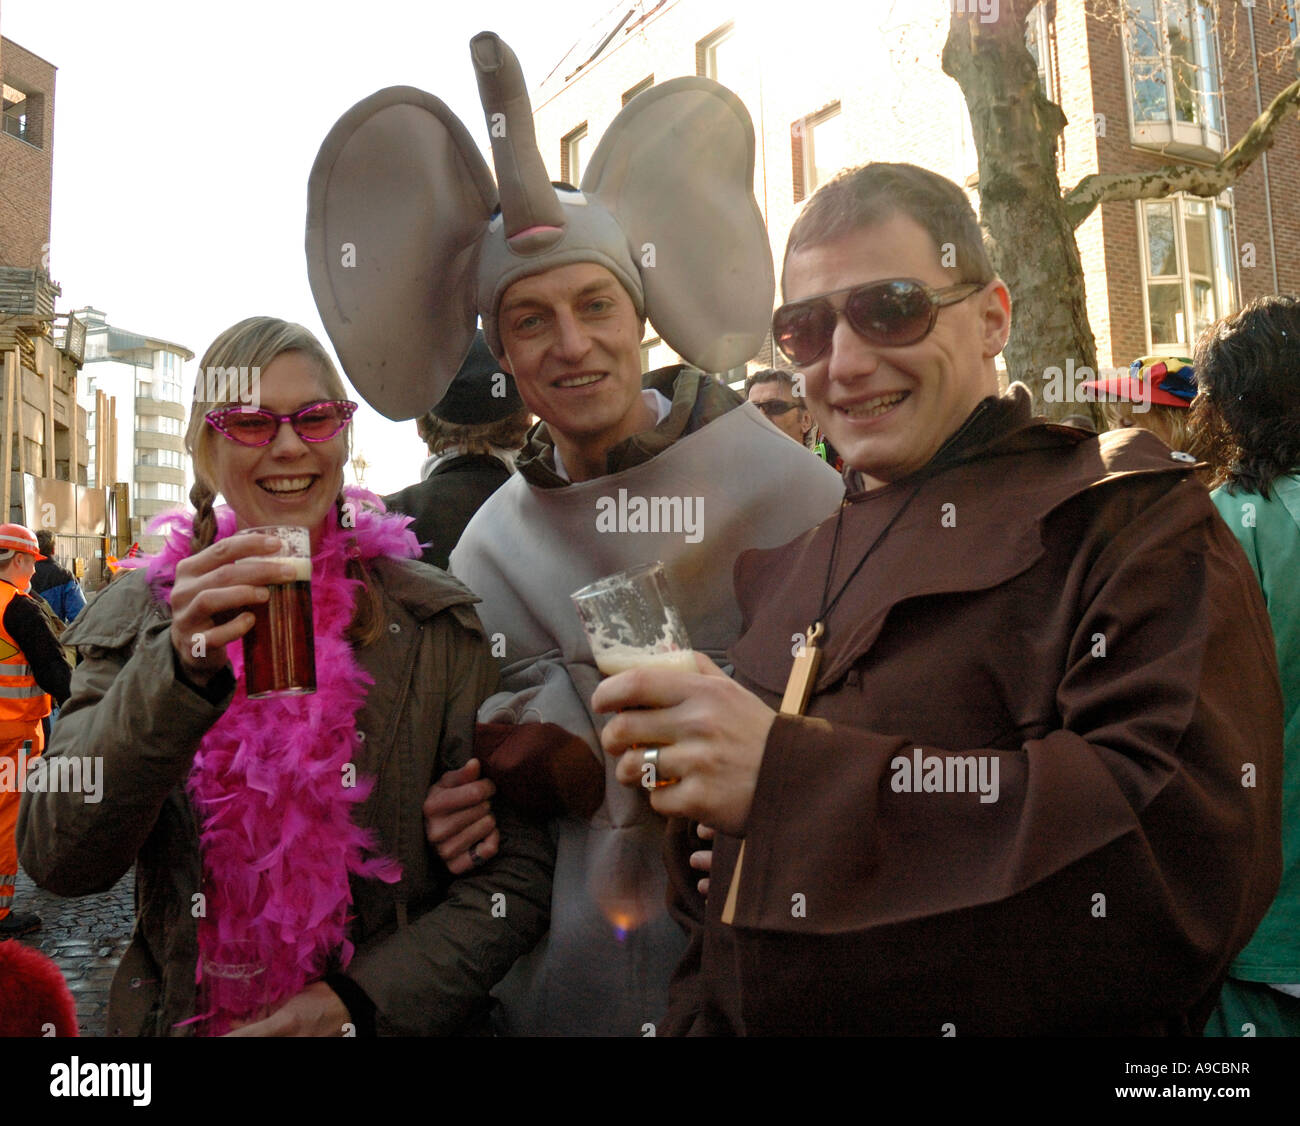 Young people dressed up for the Duesseldorf carnival celebrations, drinking alt beer outside Uerige pub 2007 Stock Photo